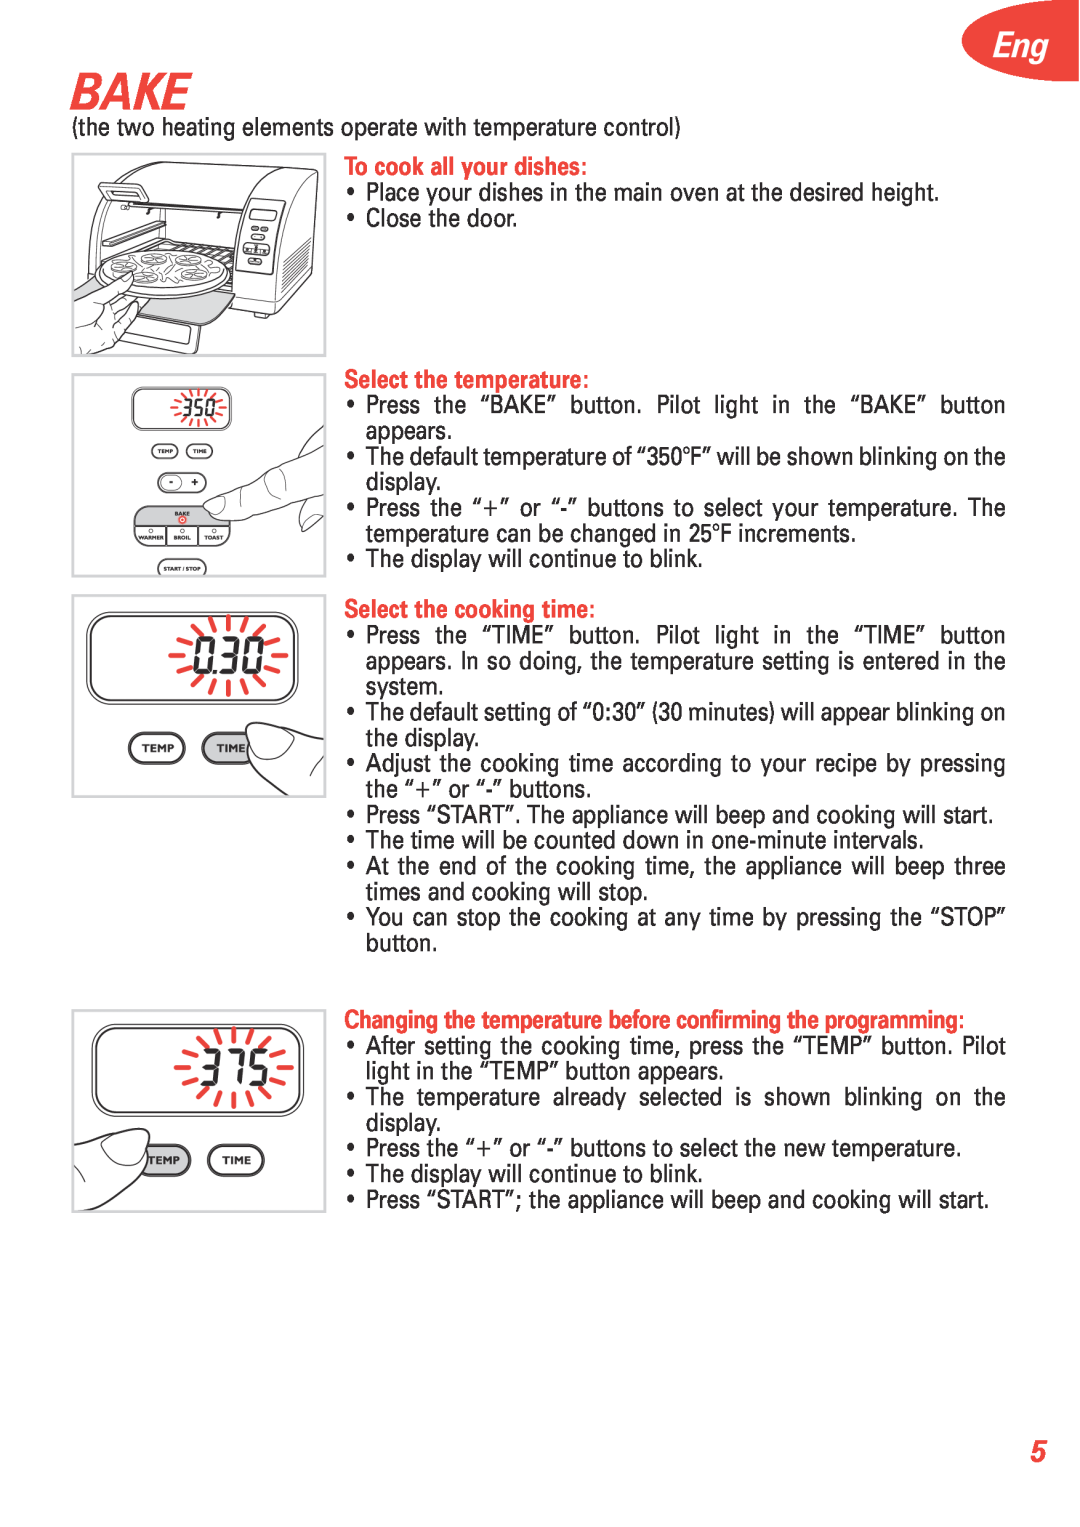 T-Fal 5252 manual Bake, To cook all your dishes, Select the temperature, Select the cooking time 